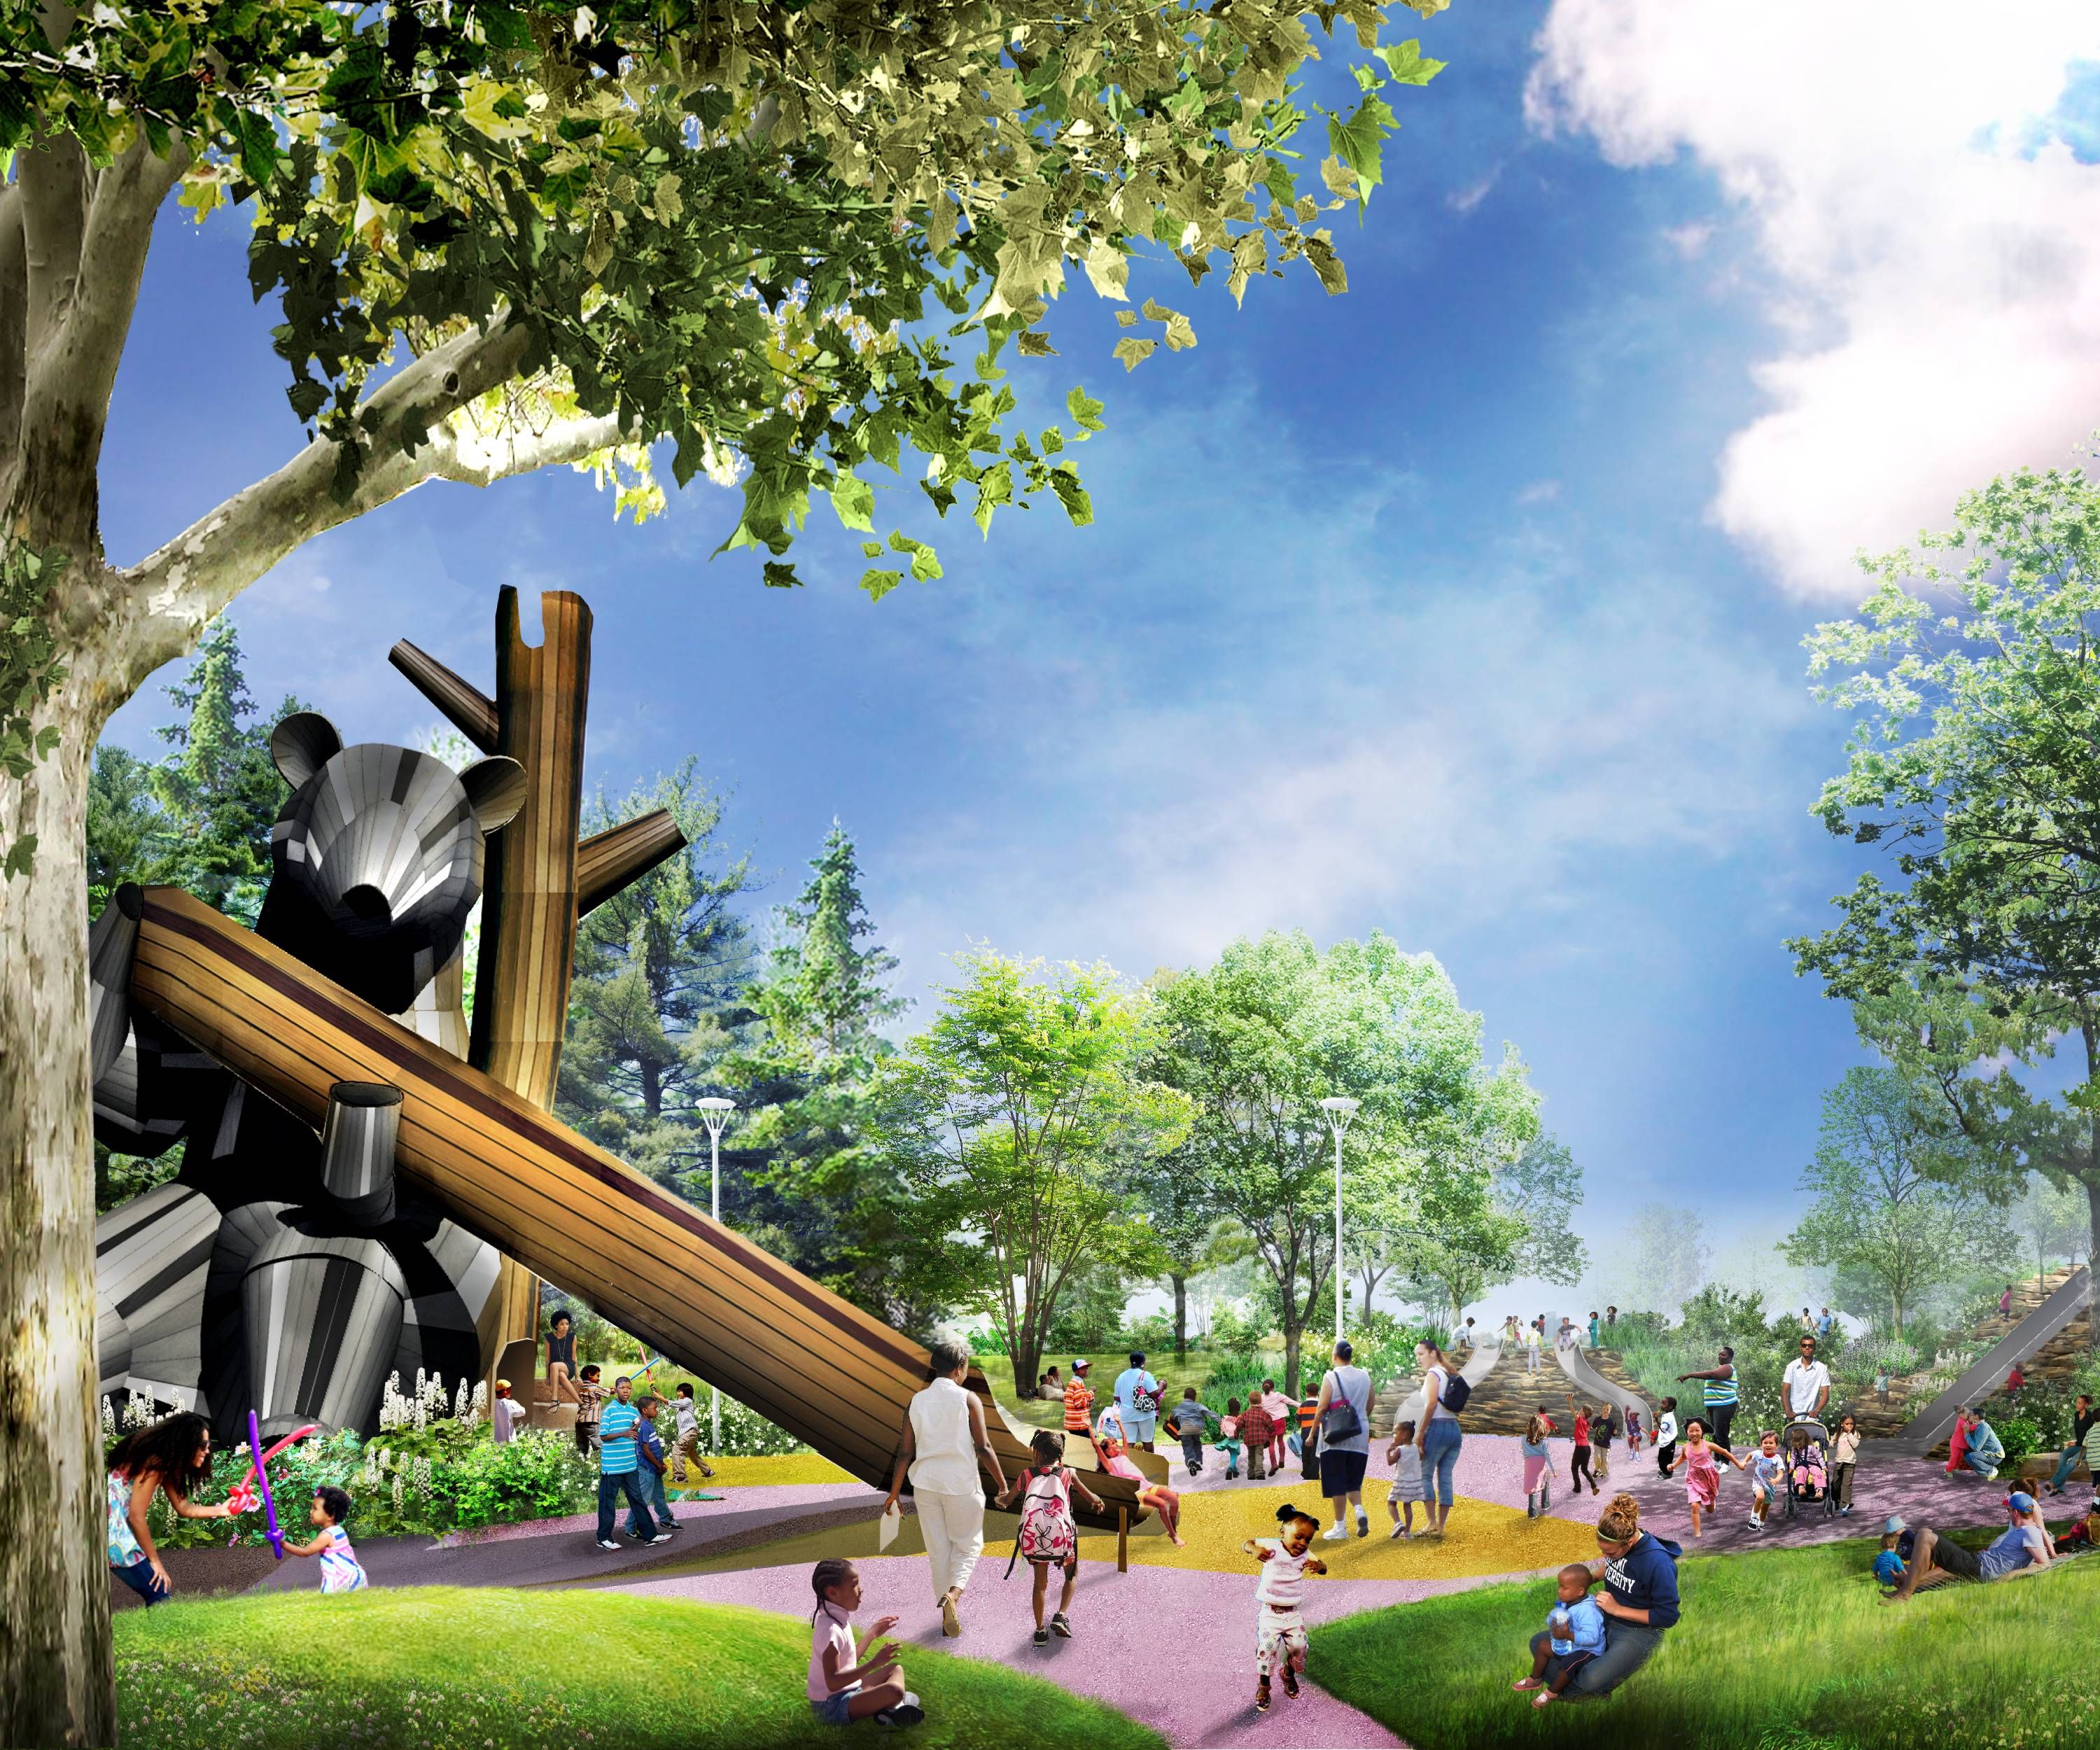 A rendering of play equipment with an animal theme.